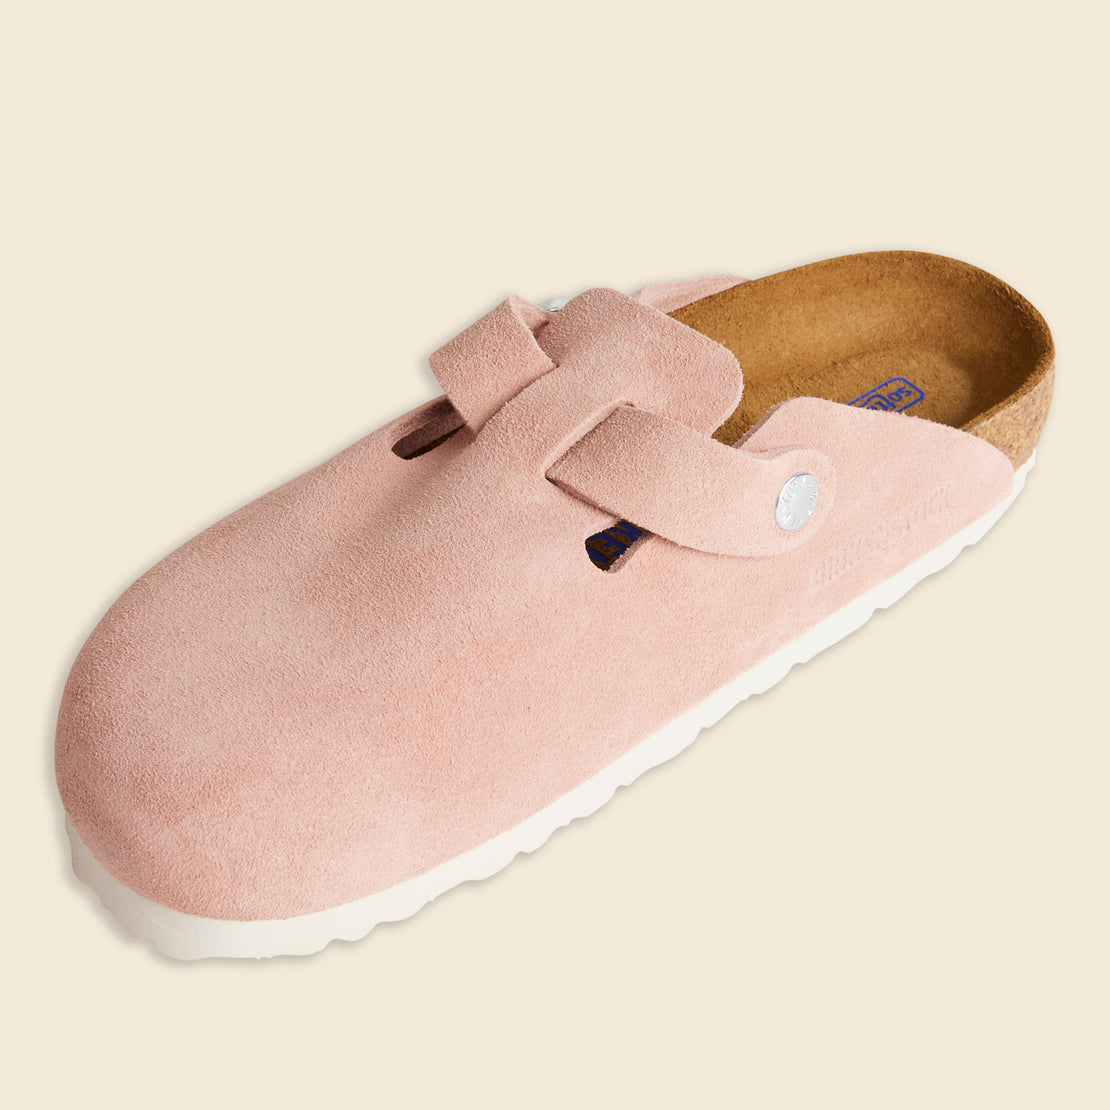 Boston Suede Clog - Pink Clay - Birkenstock - STAG Provisions - W - Shoes - Sandals